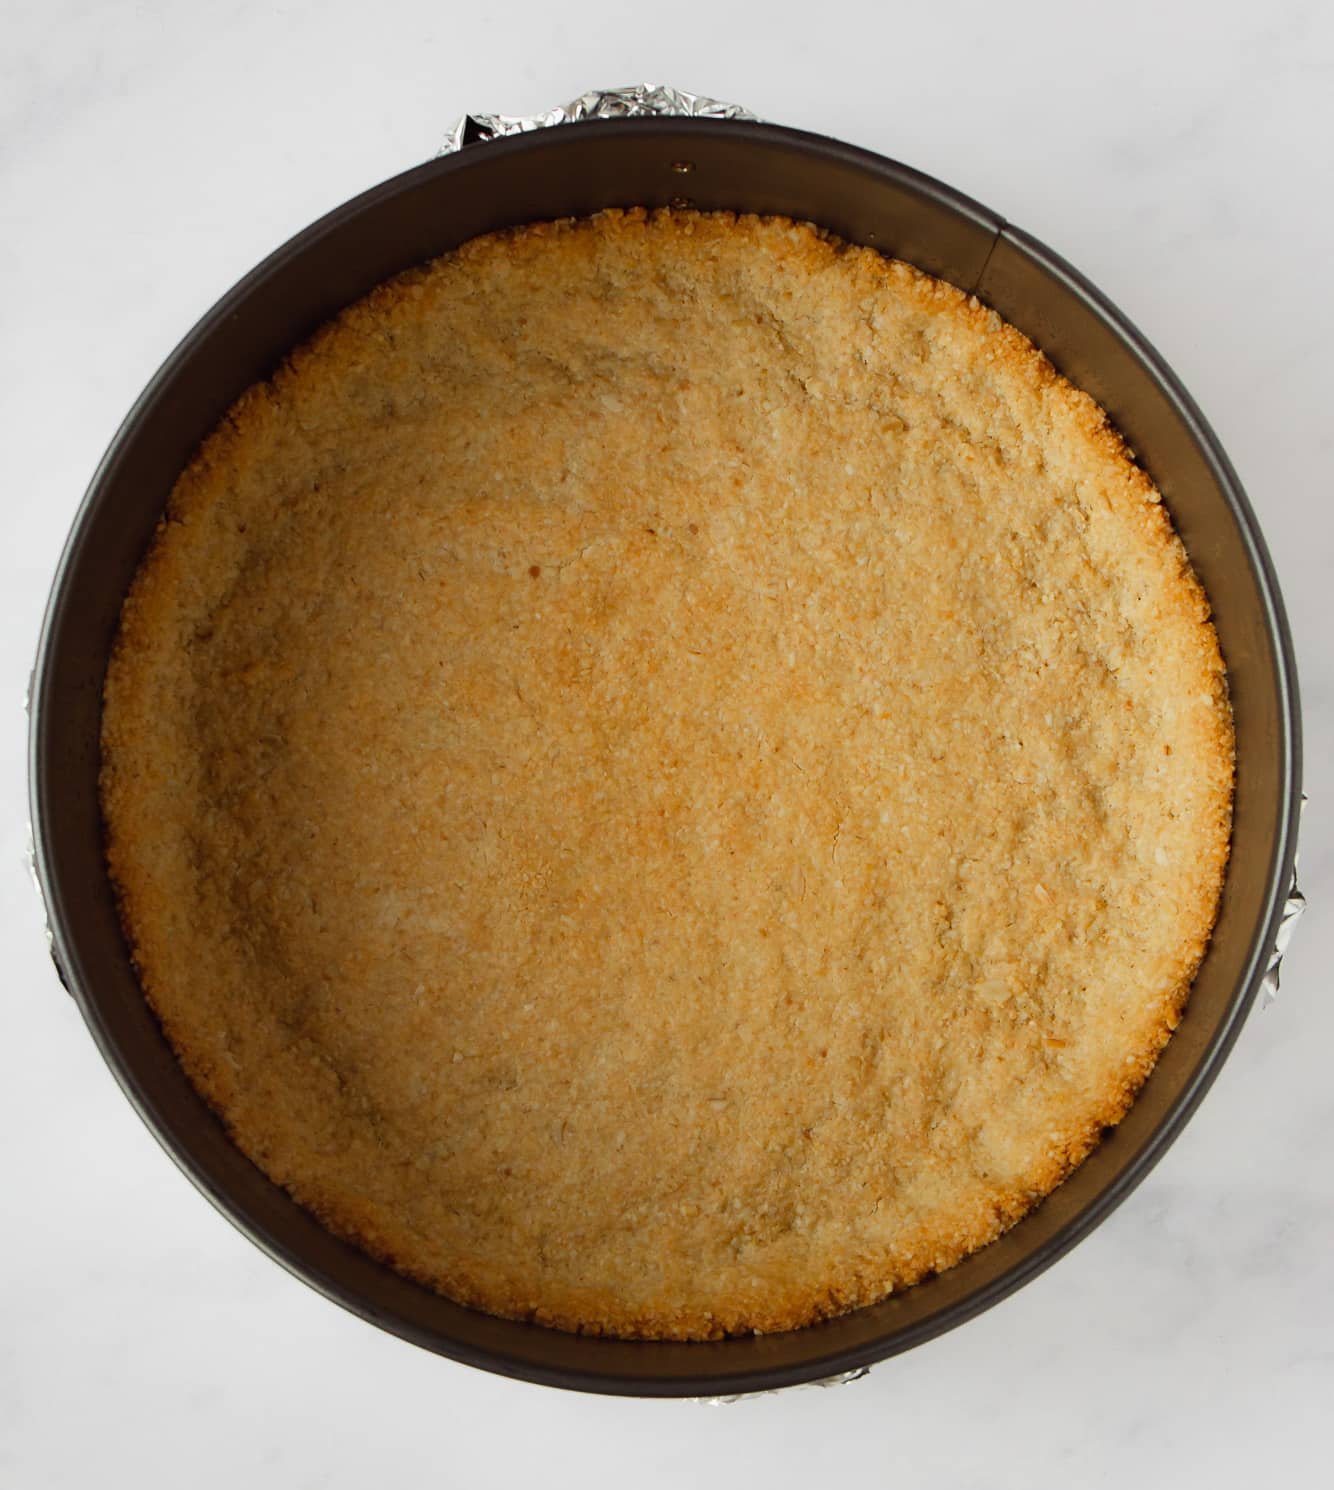 Almond Oat Crust Baked in a Springform Pan.